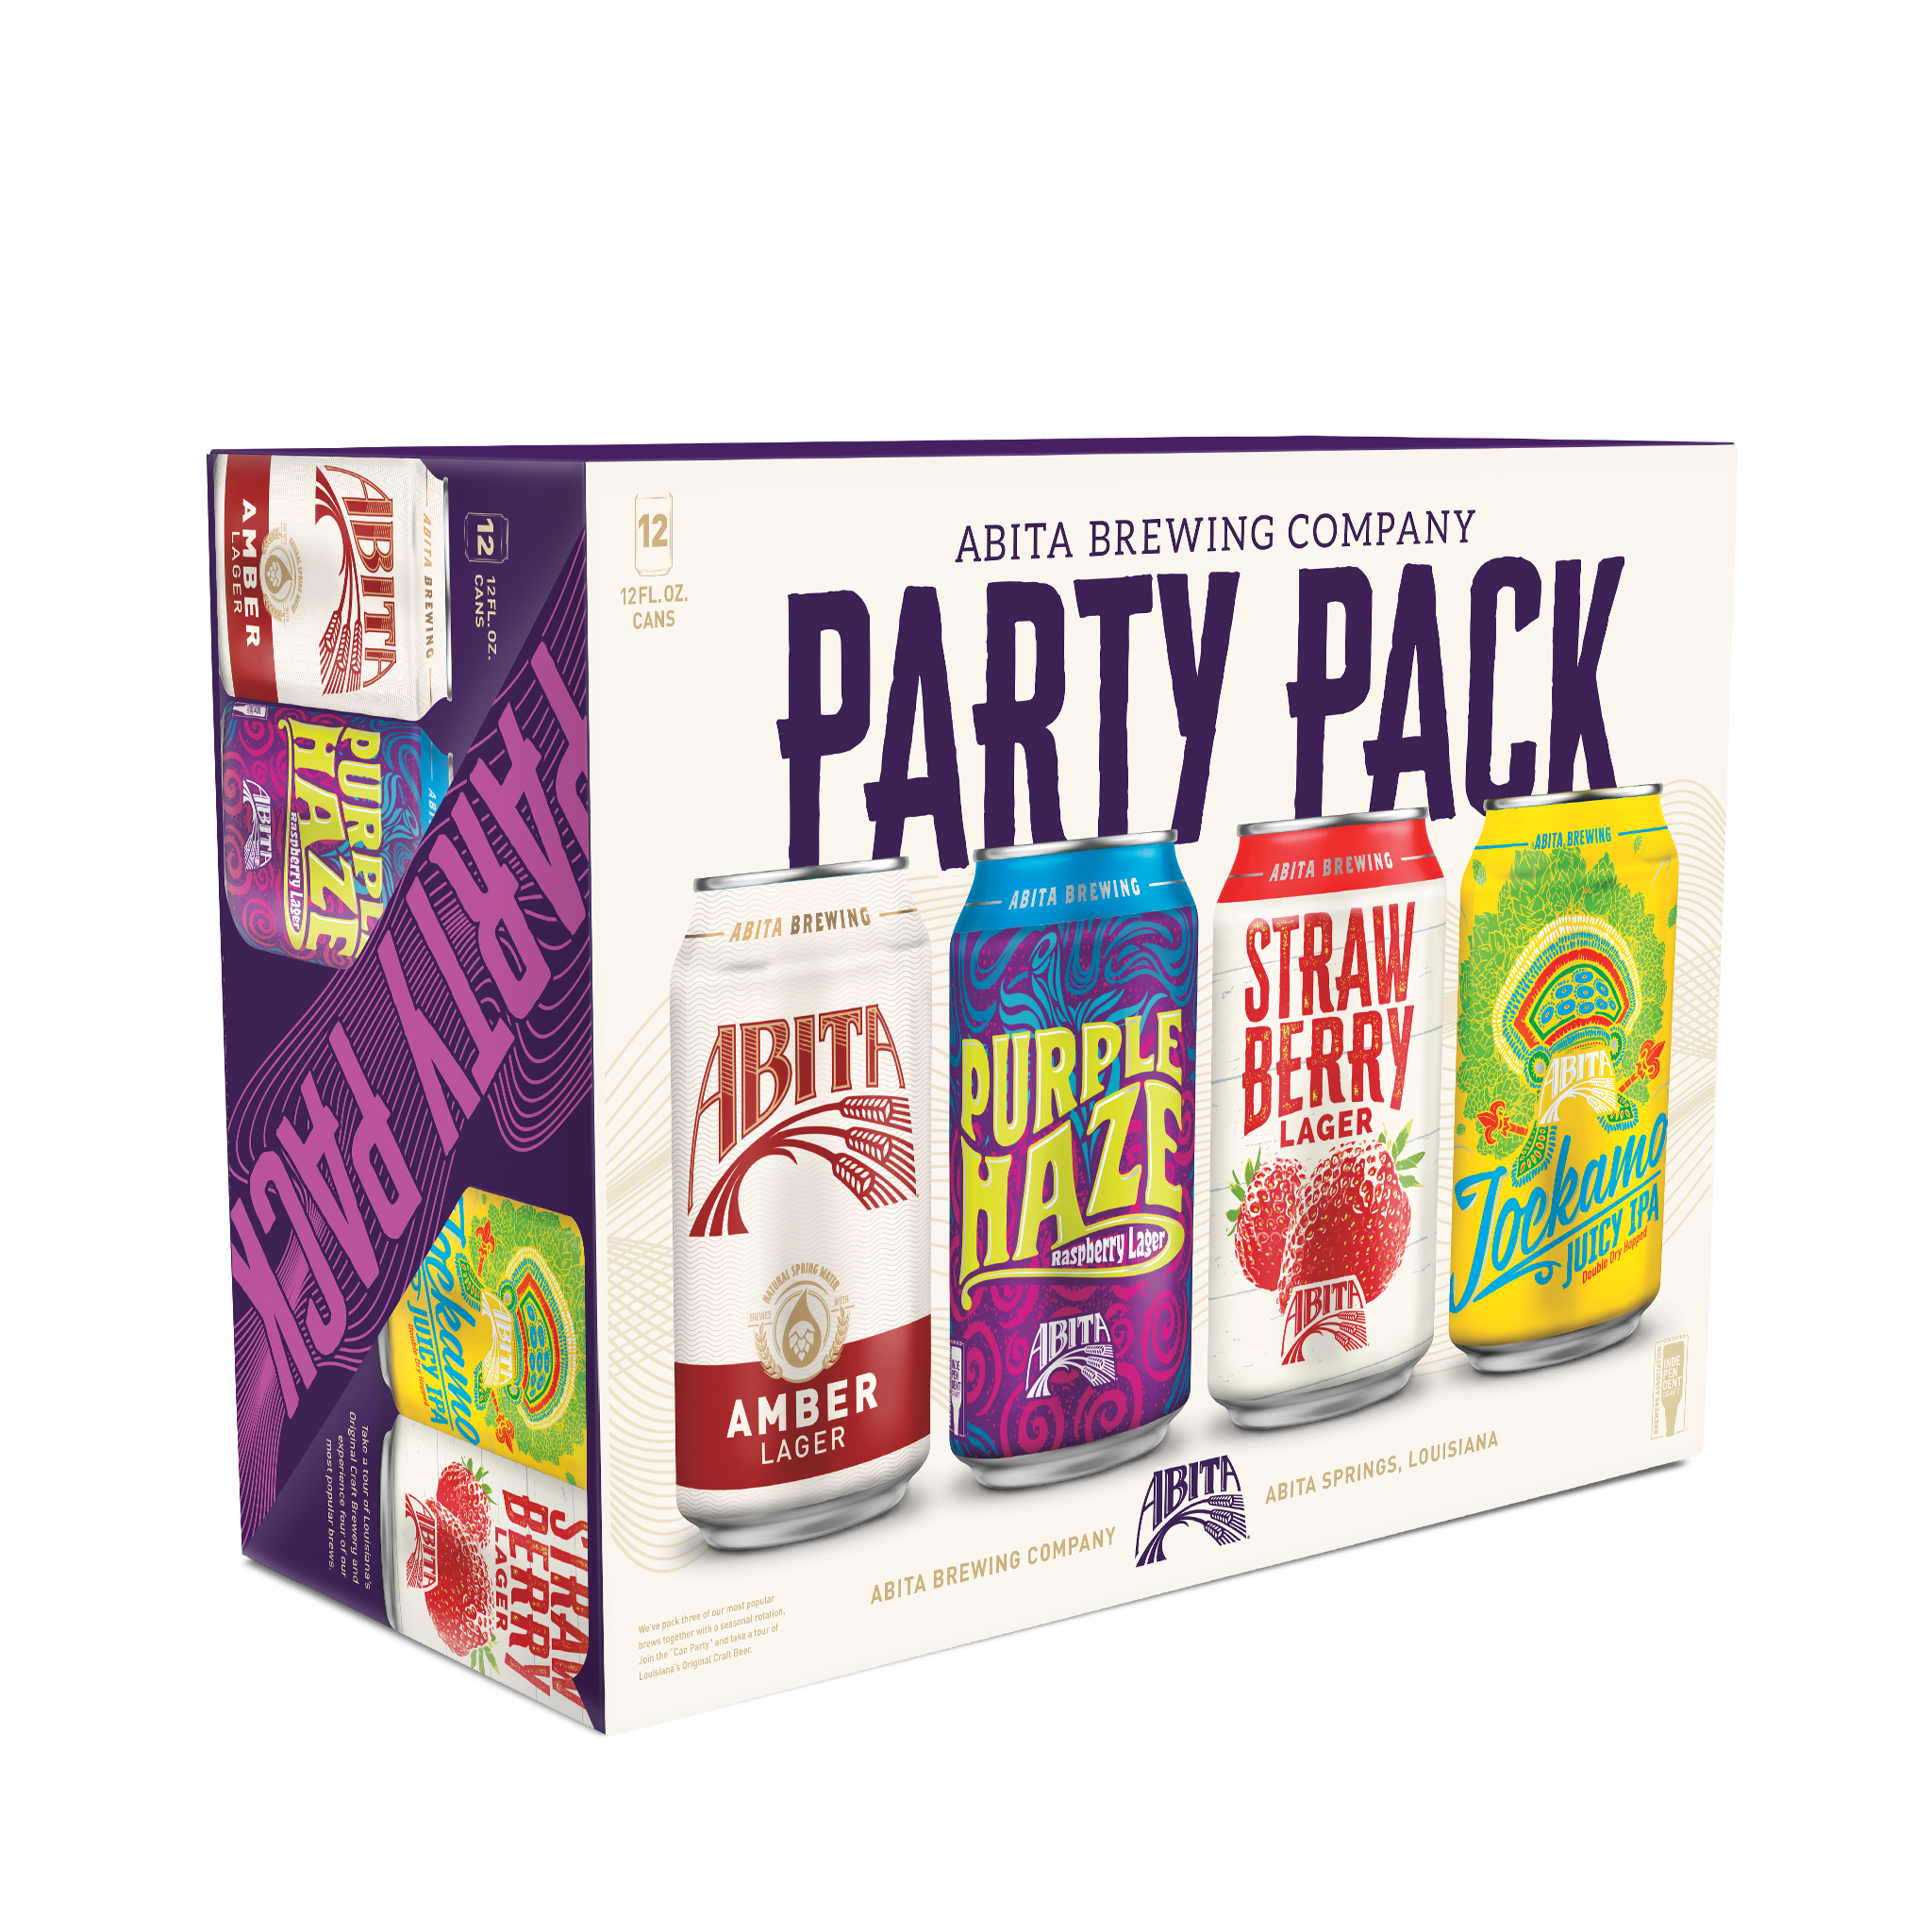 can party pack with 4 abita beers featured